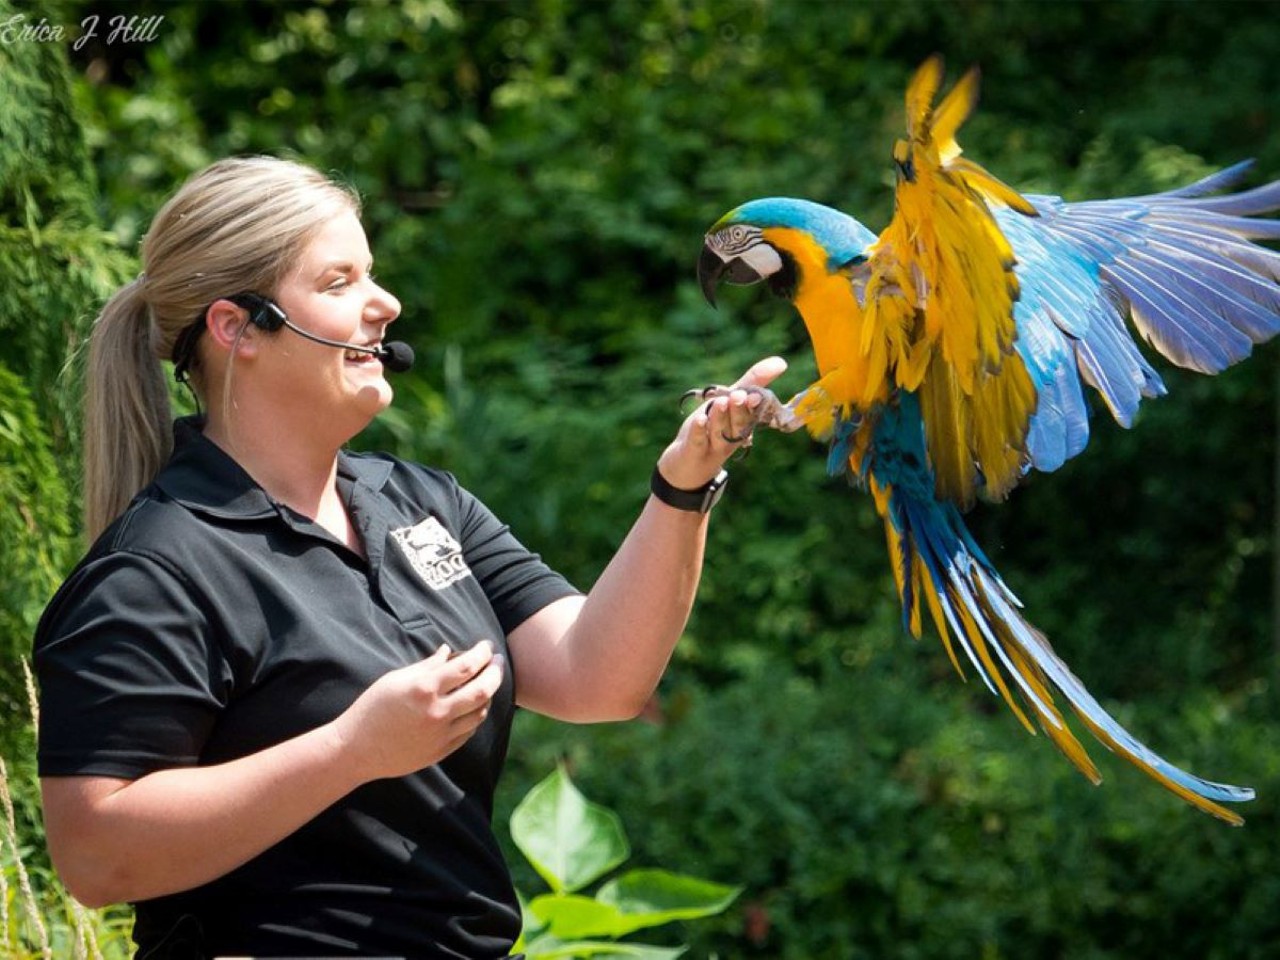 Wings of Wonder
When: Jan. 7 at 1 p.m.
Where: Spring Grove Funeral Homes, Cemetery and Arboretum's Norman Chapel
What: Educational and interactive event about winged animals.
Who: Animal trainers from the Cincinnati Zoo
Why: See beautiful creatures up close and personal.